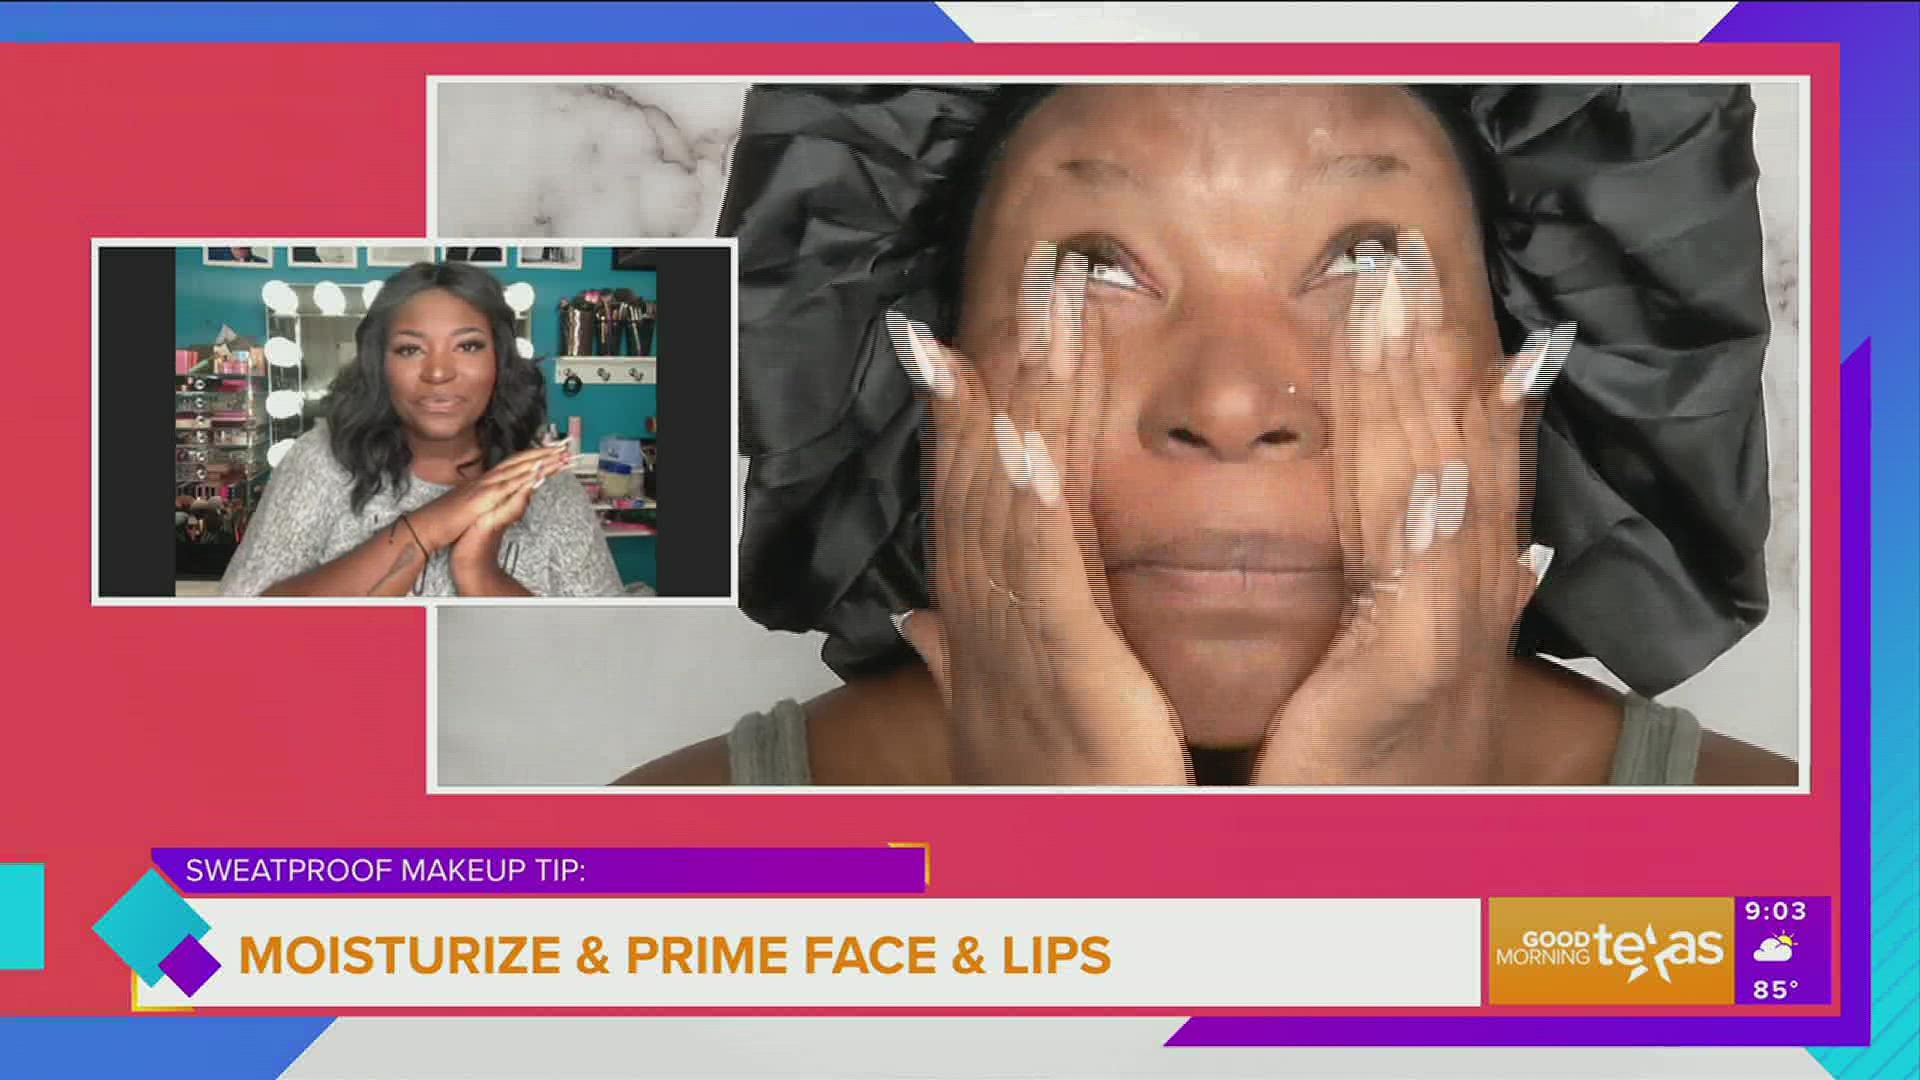 You may notice, these hot temperatures do not mix well with your full glam. Makeup artist Chipo Gray is ready to save your face with sweatproof makeup tips.